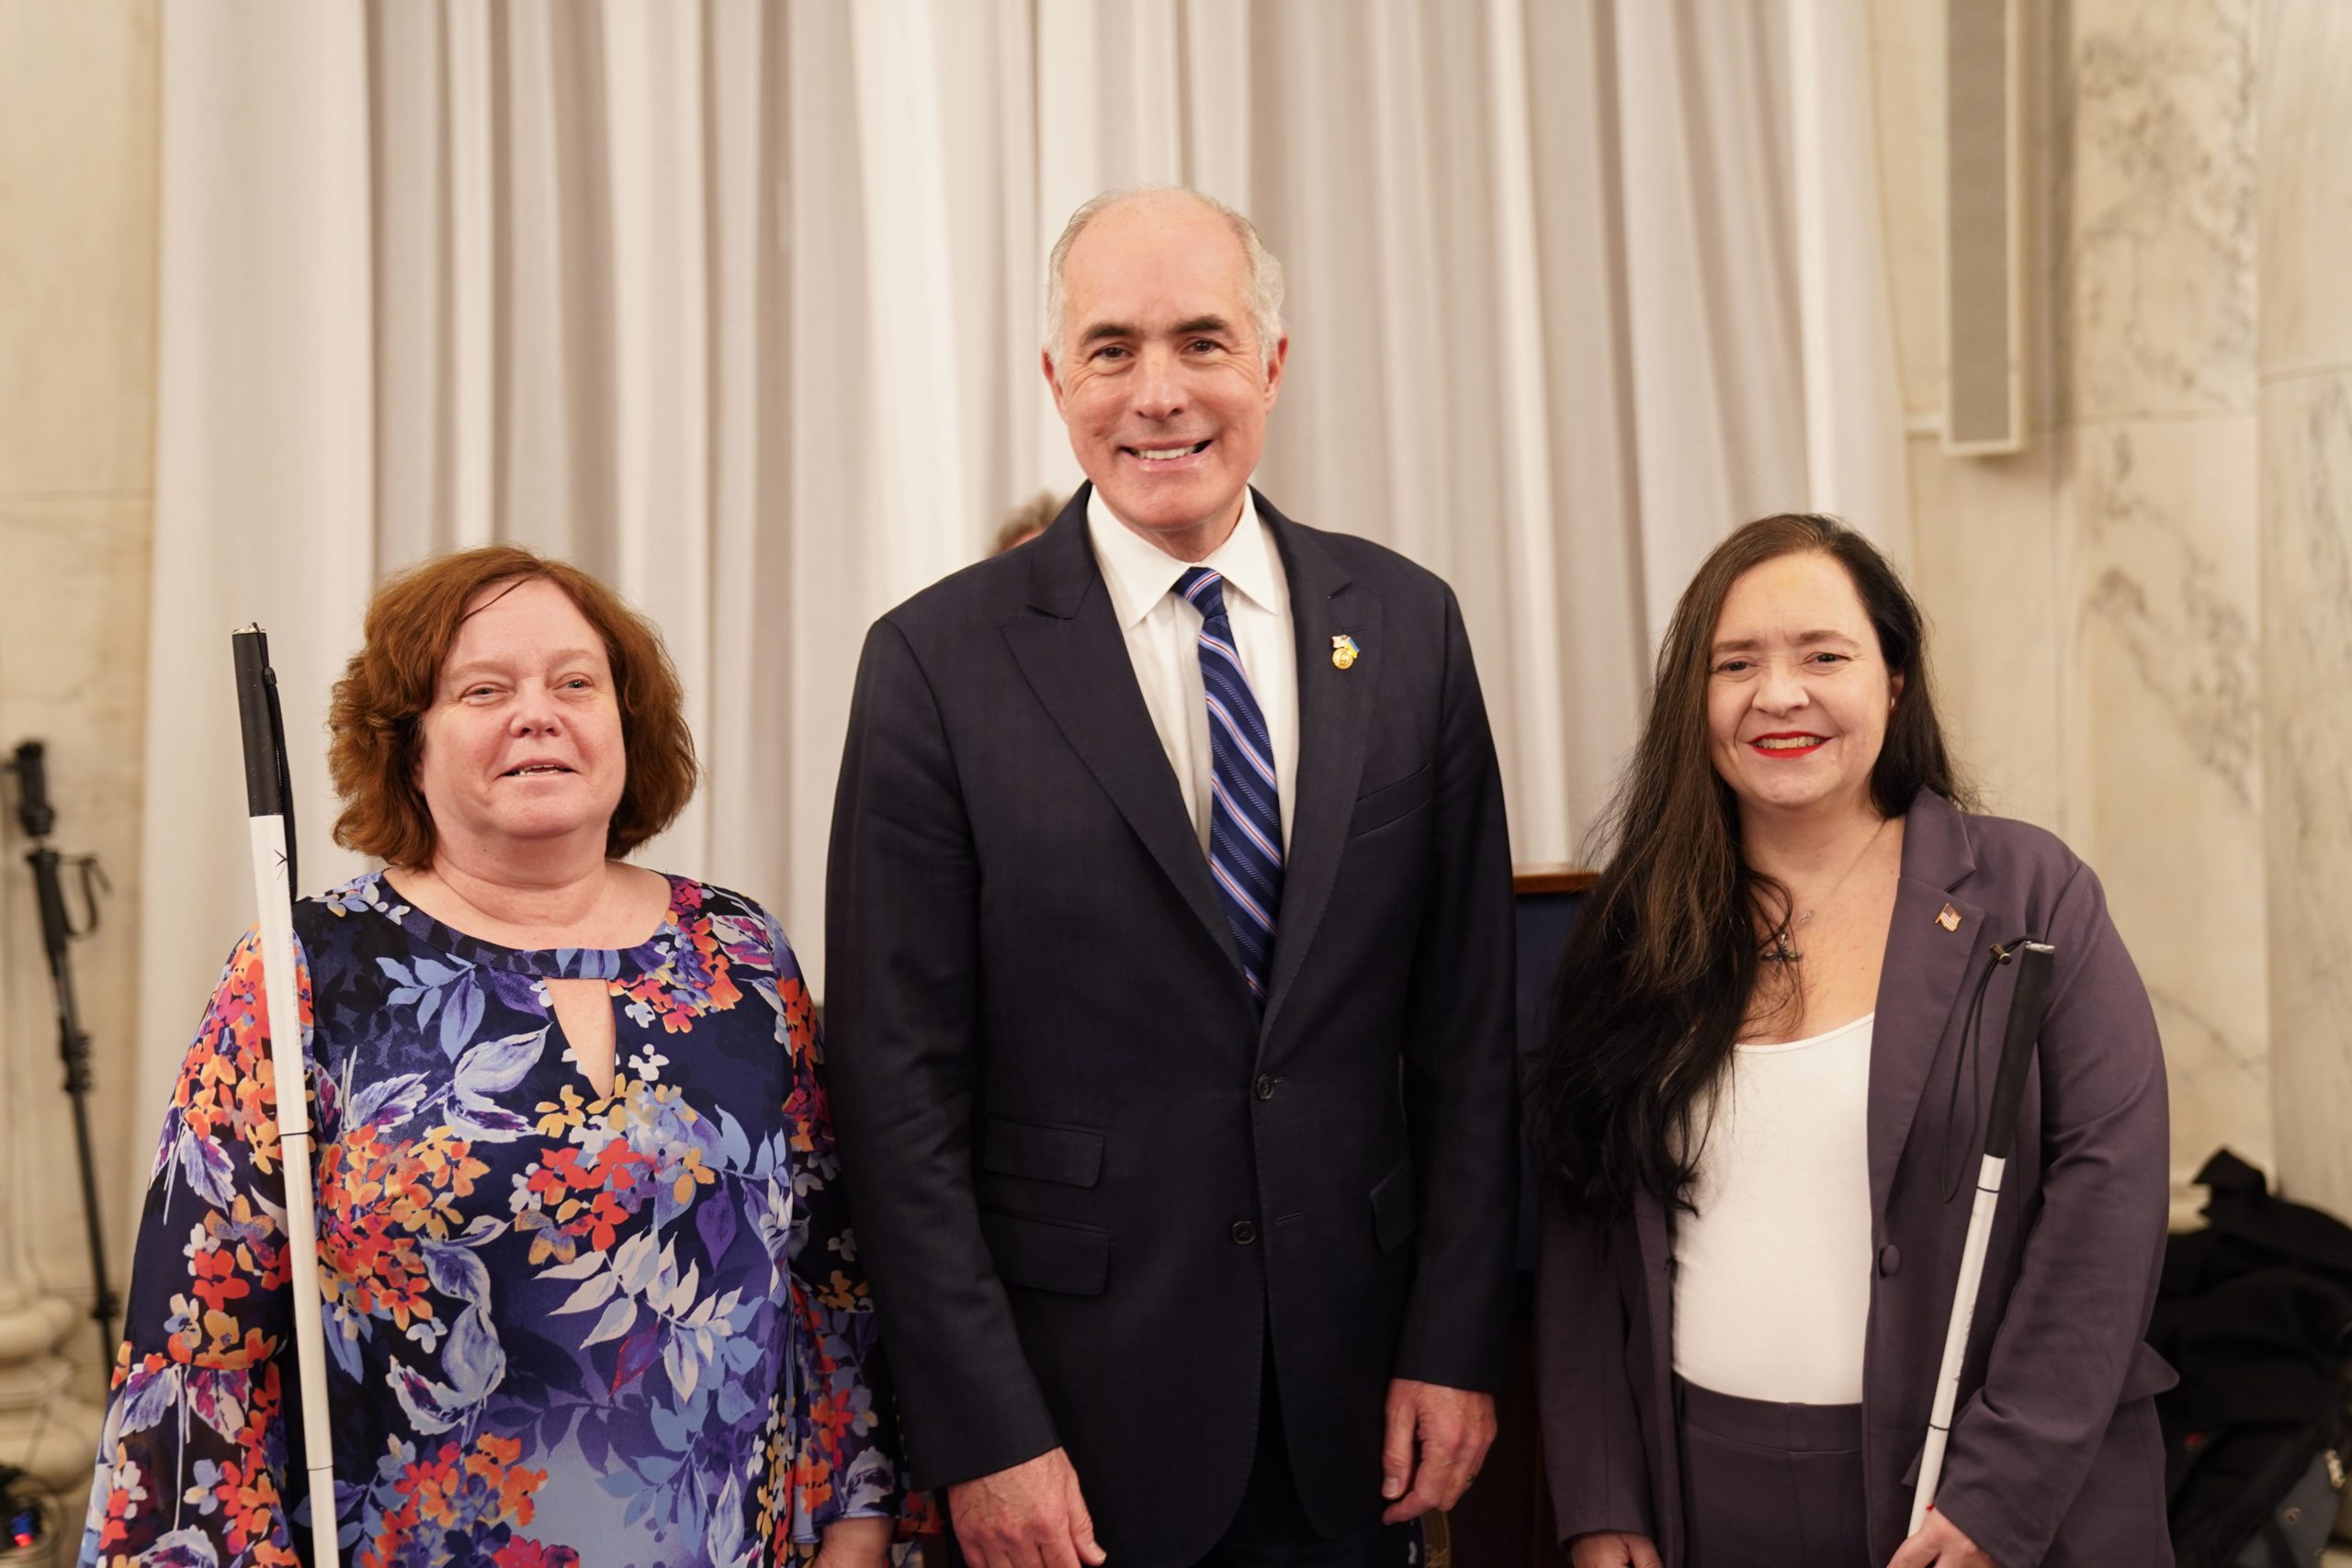 From left to right, NFB of PA President Lynn Heitz, US Senator Bob Casey (D-PA), and NFB of PA Legislative Director Emily Gindlesperger.